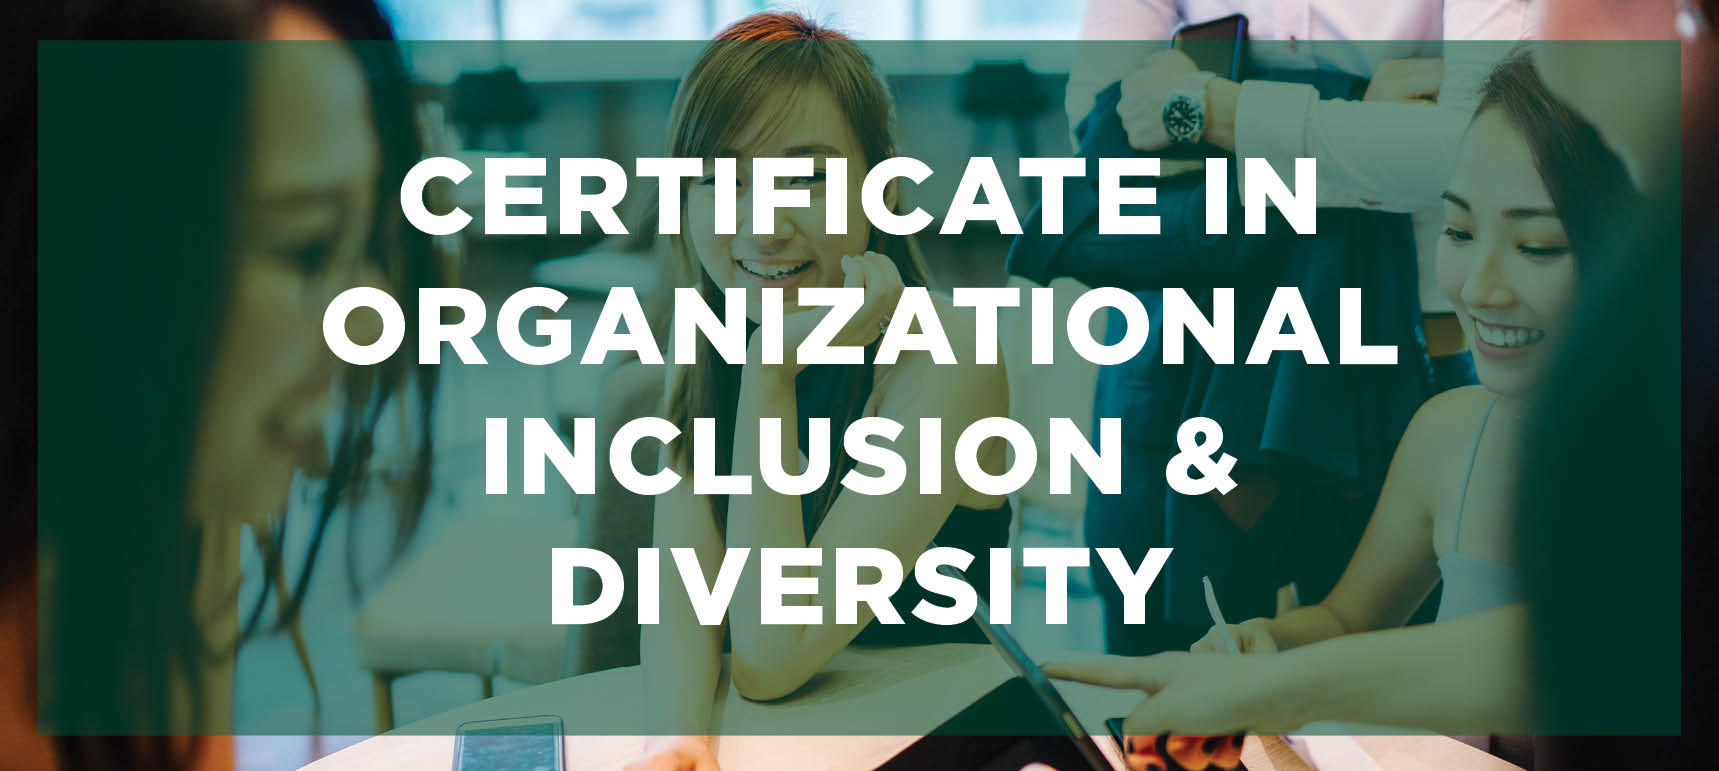 Learn more about the Certificate in Organizational Inclusion and Diversity program